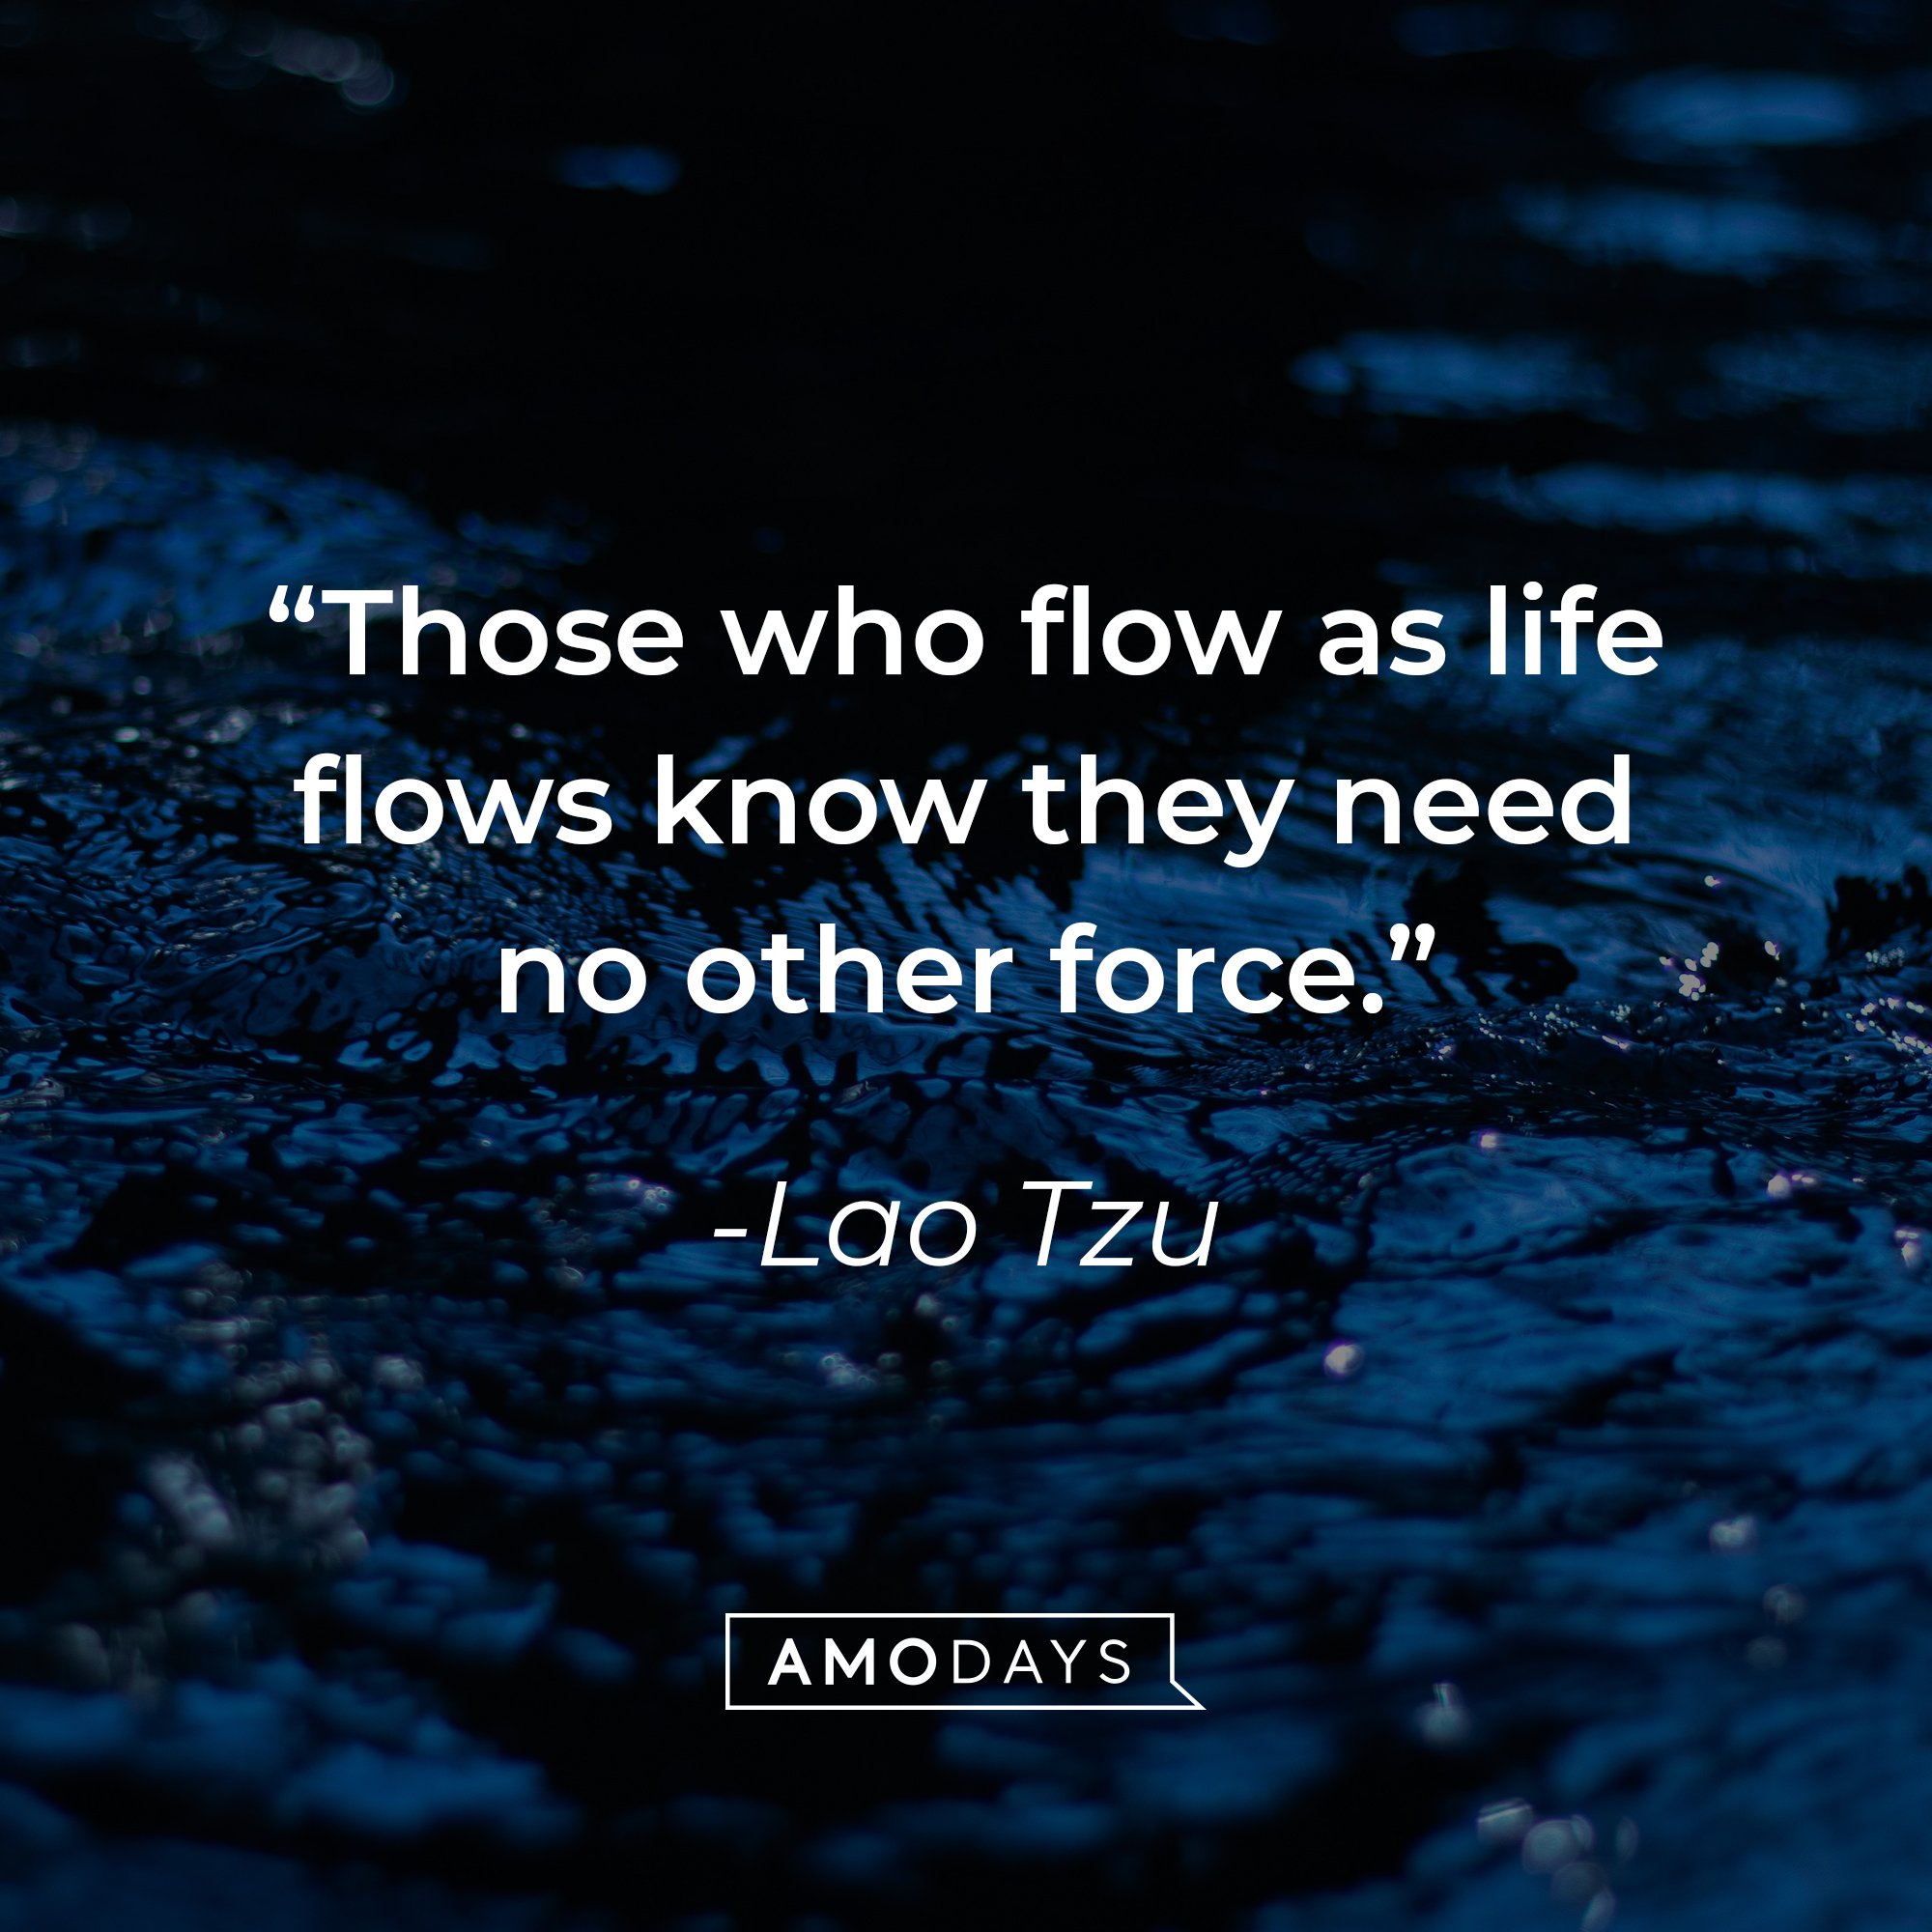 Lao Tzu's quote: "Those who flow as life flows know they need no other force." | Image: AmoDays